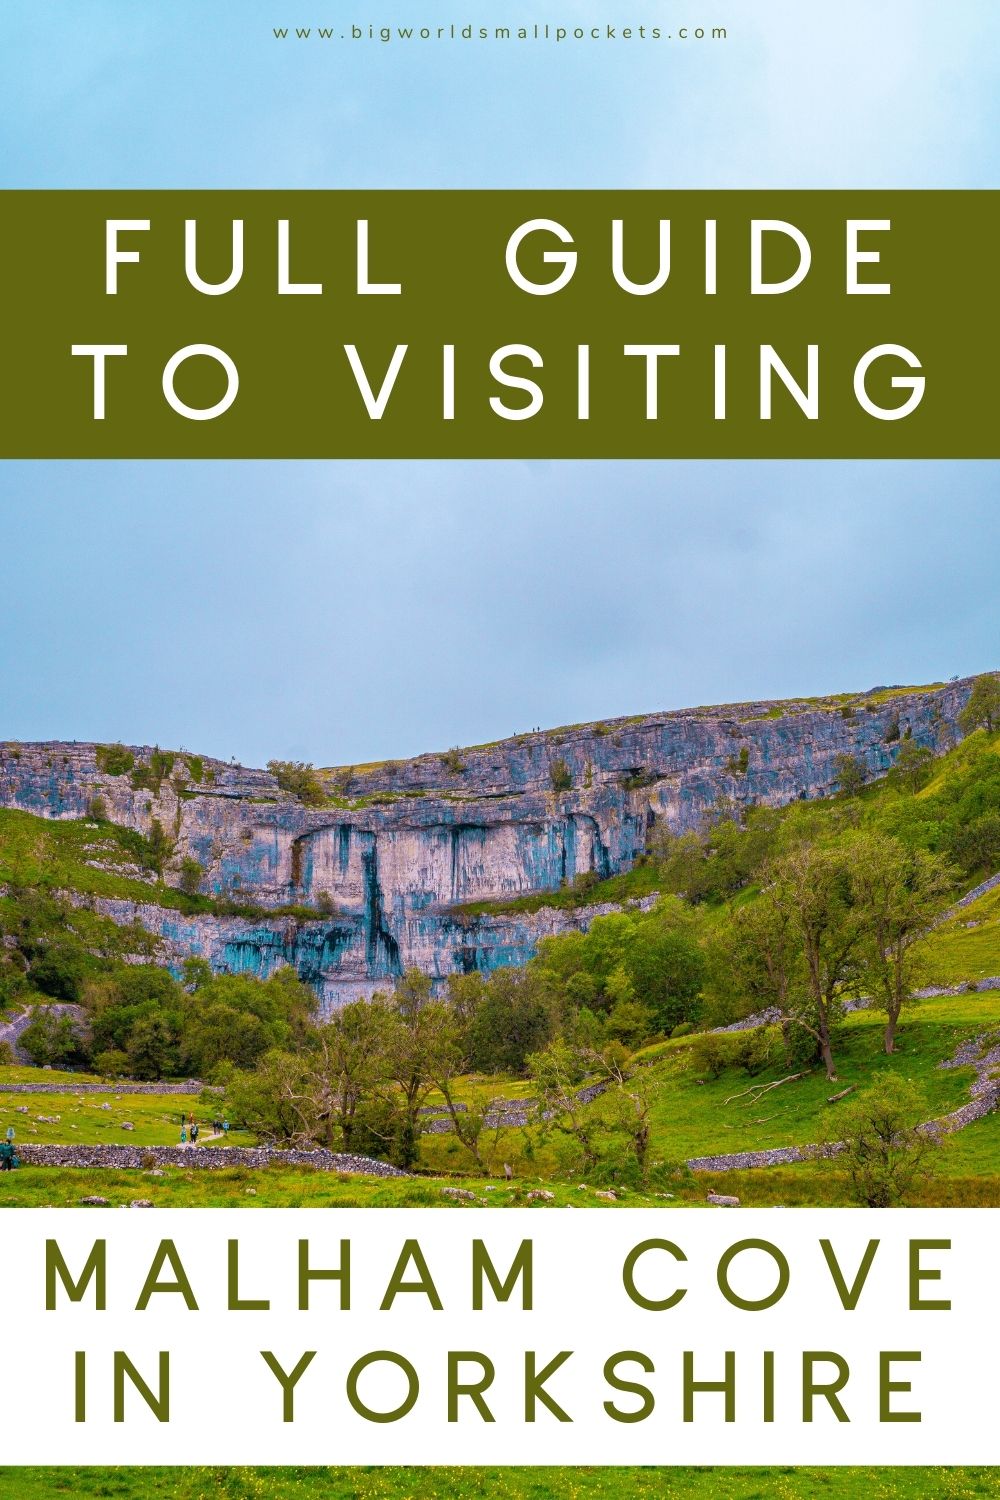 Ultimate Guide to Visiting Yorkshire's Malham Cove